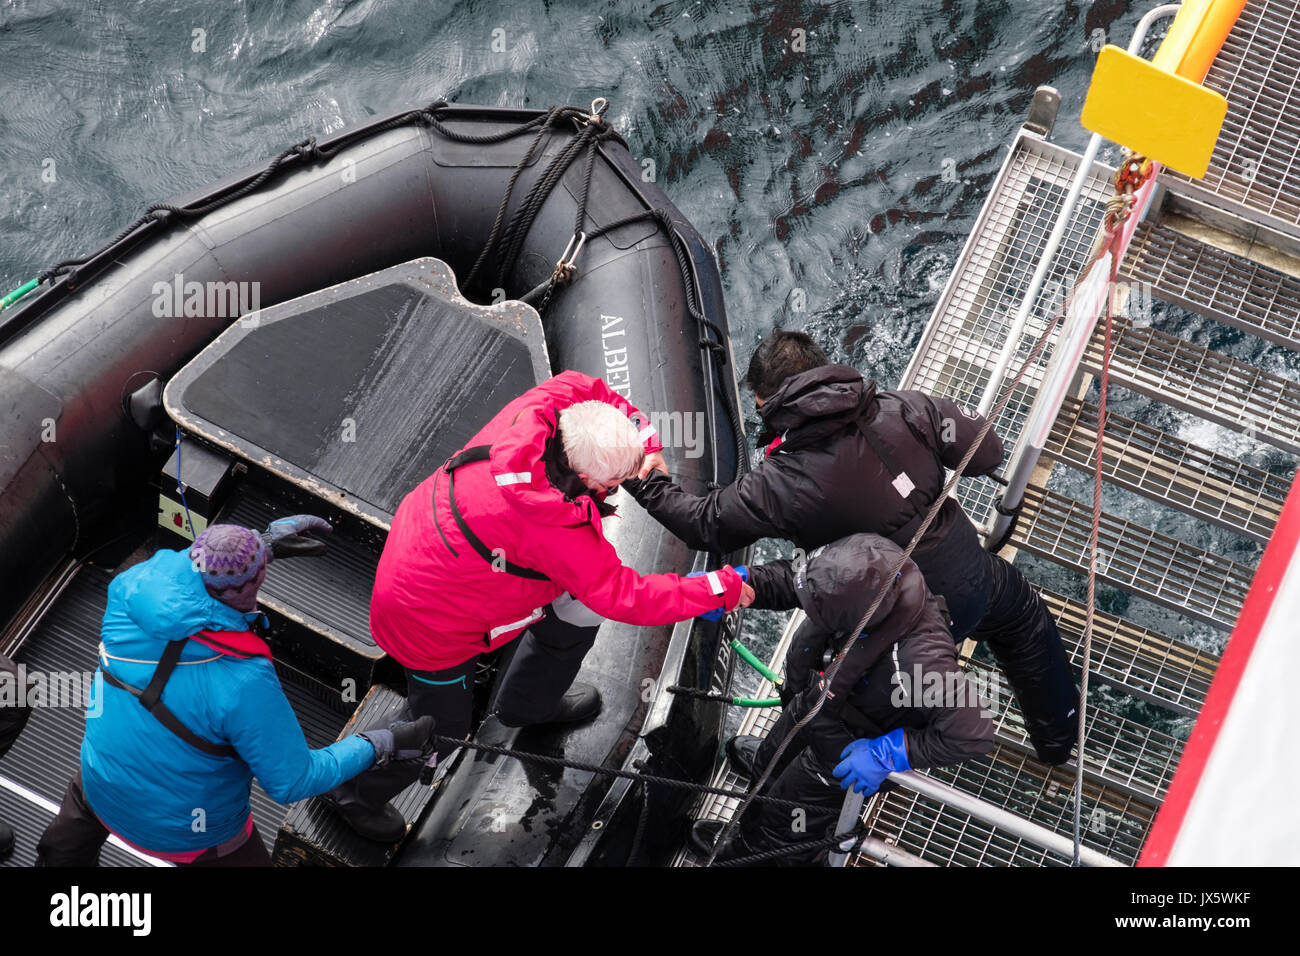 G Adventures Expedition cruise ship passenger being helped from a Zodiac dinghy back on board by crew using a sailors grip. Norway, Scandinavia Stock Photo